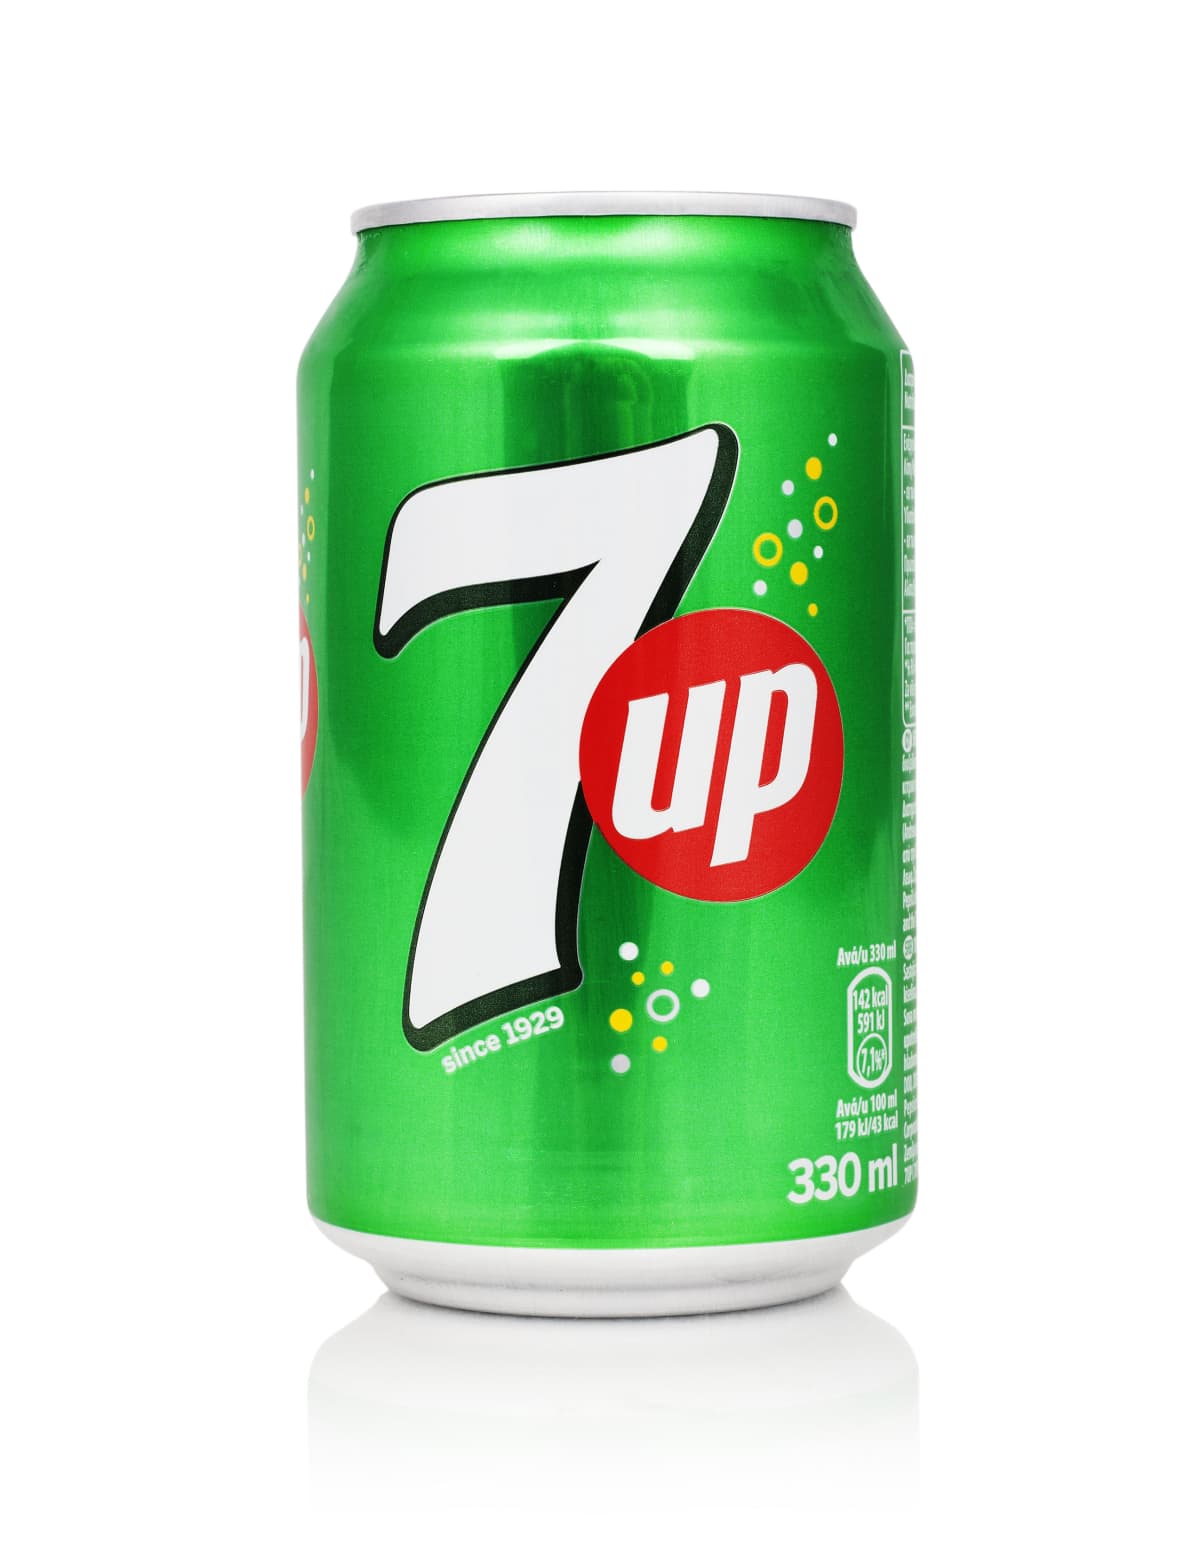 Kragujevac, Serbia - April 11, 2016: Aluminum can of 7up produced by PepsiCo Inc. isolated on white background.